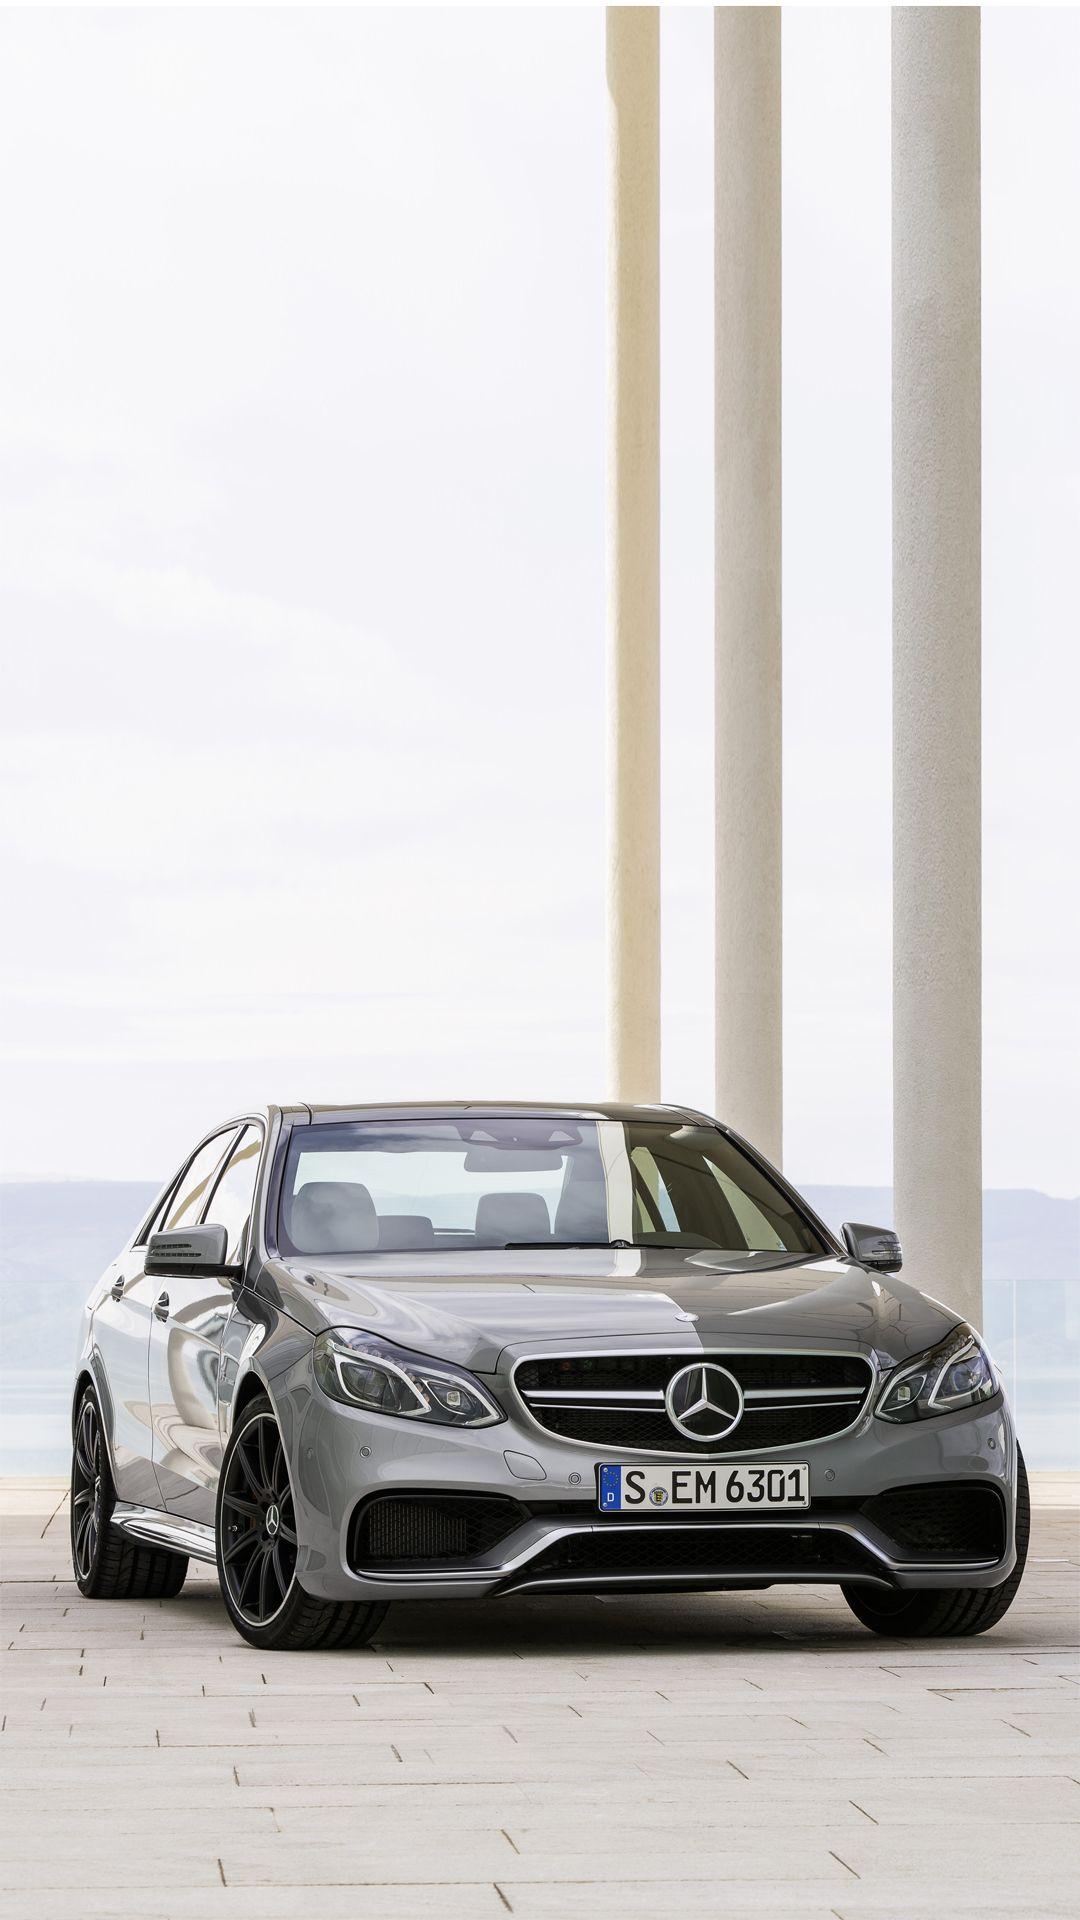 Mercedes Benz E63 AMG Htc One Wallpaper, Free And Easy To